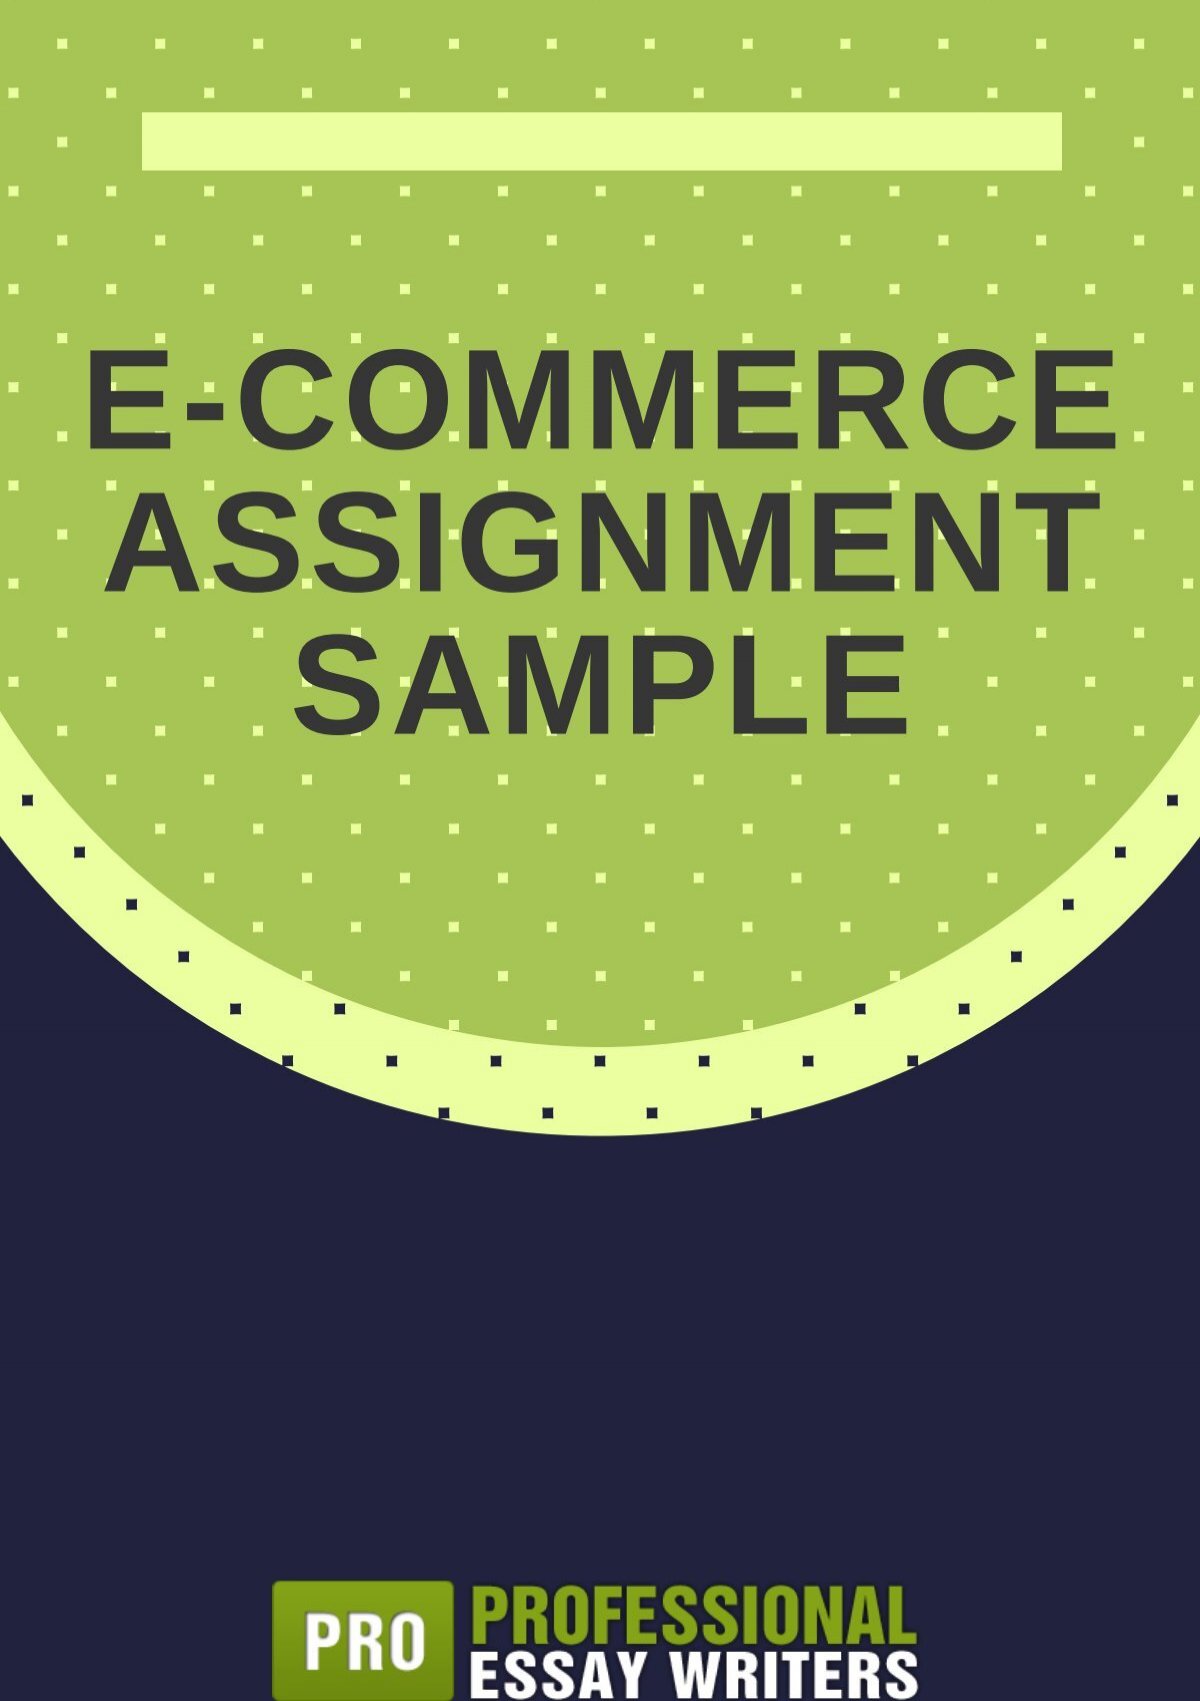 assignment on e commerce pdf